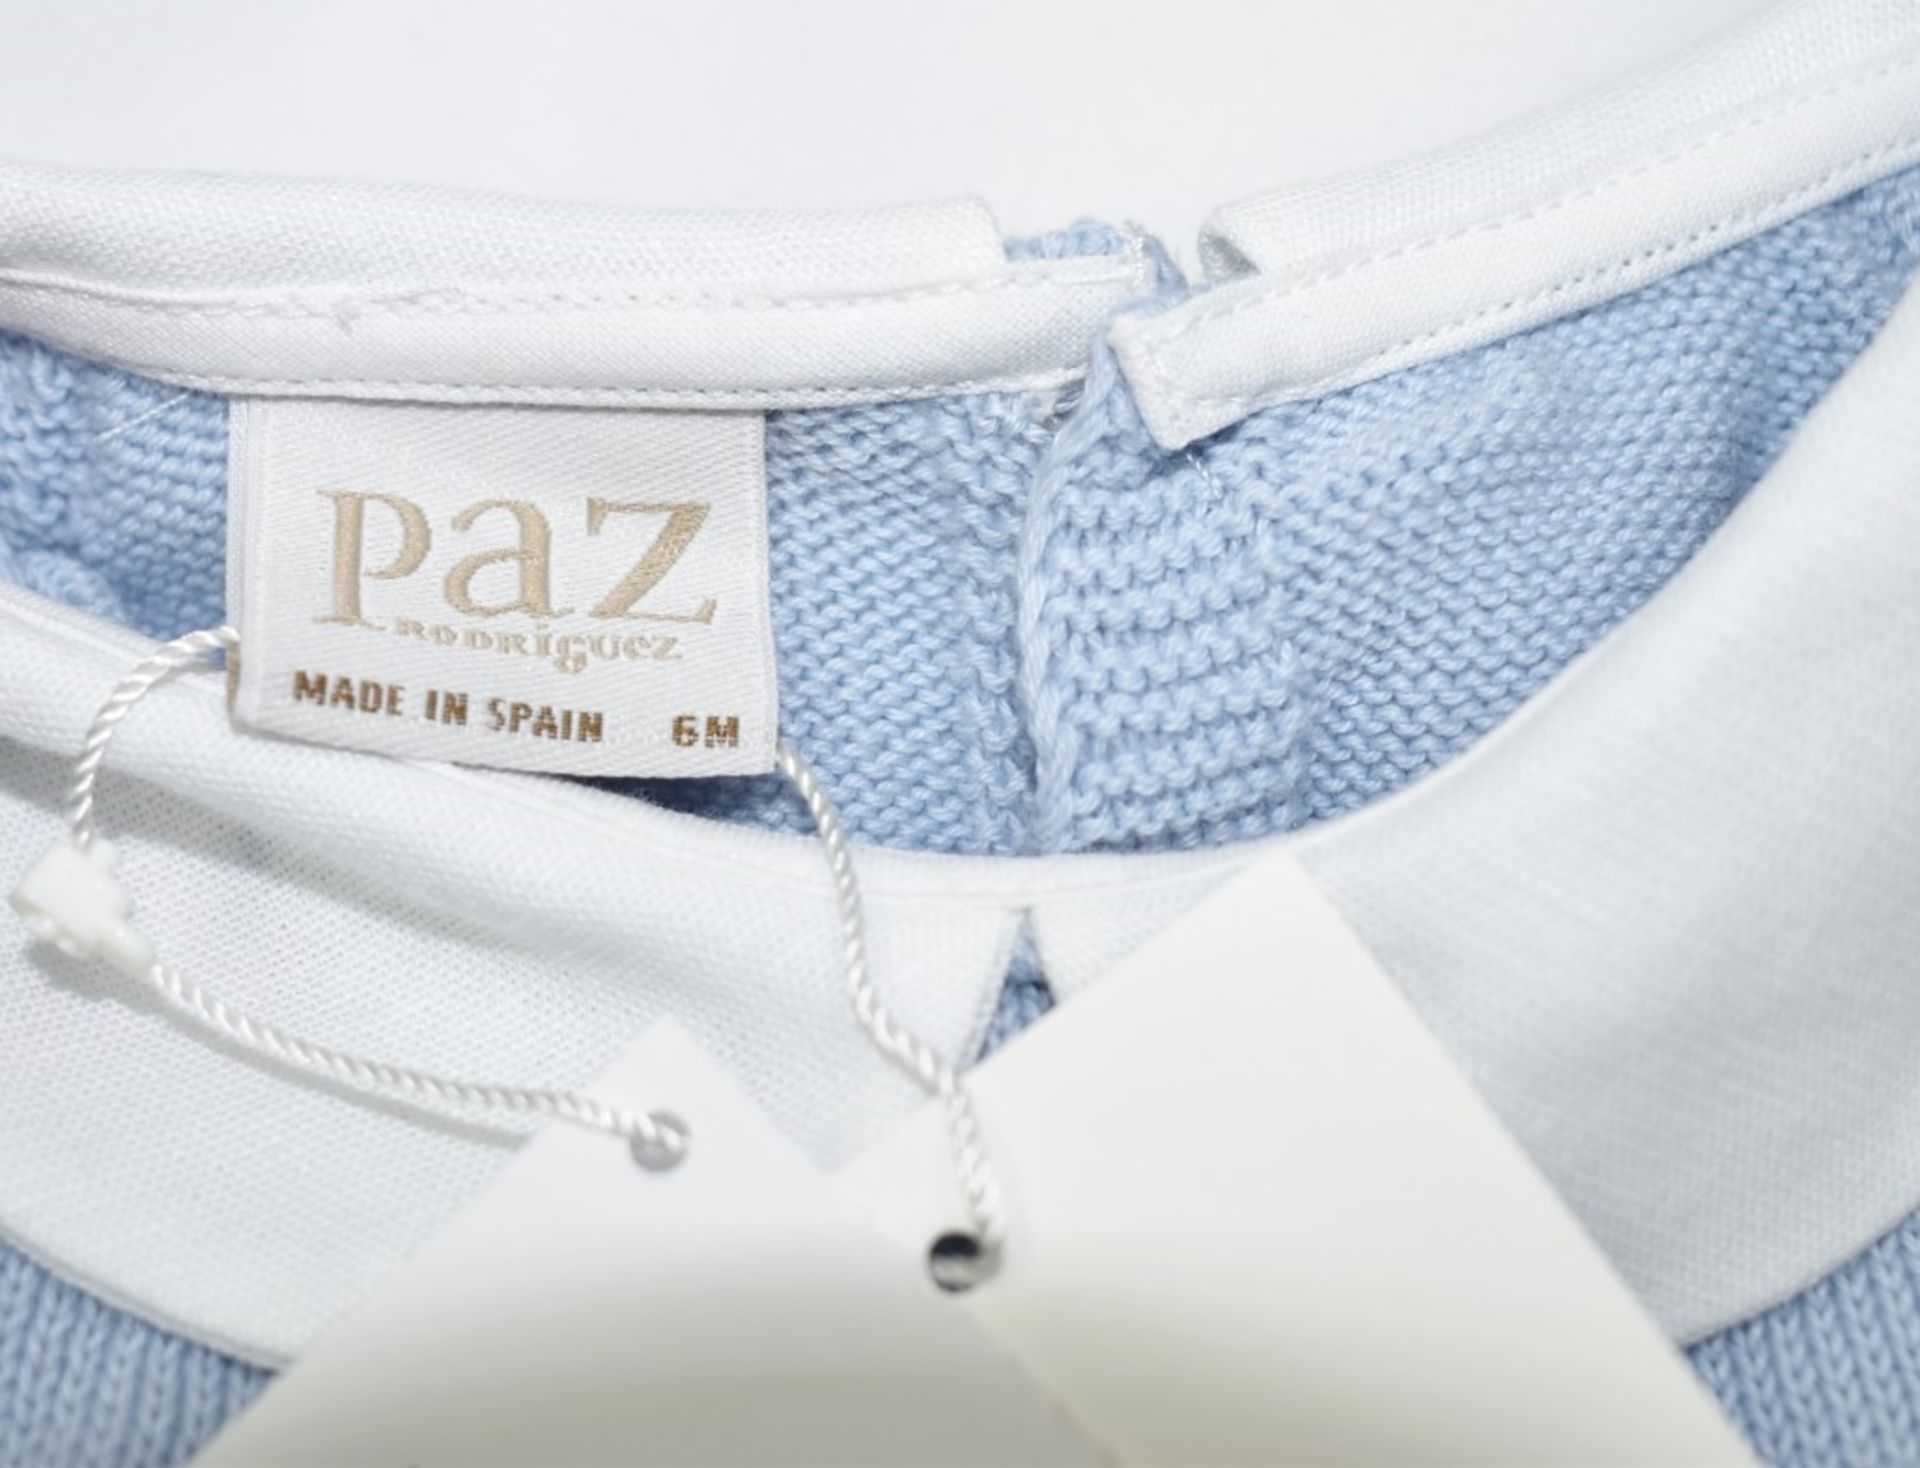 1 x PAZ RODRIGUEZ 2-Piece Knitted (Sweater, Pants) Set, in Cloud Blue, 6mth - Original Price £79.95 - Image 7 of 7